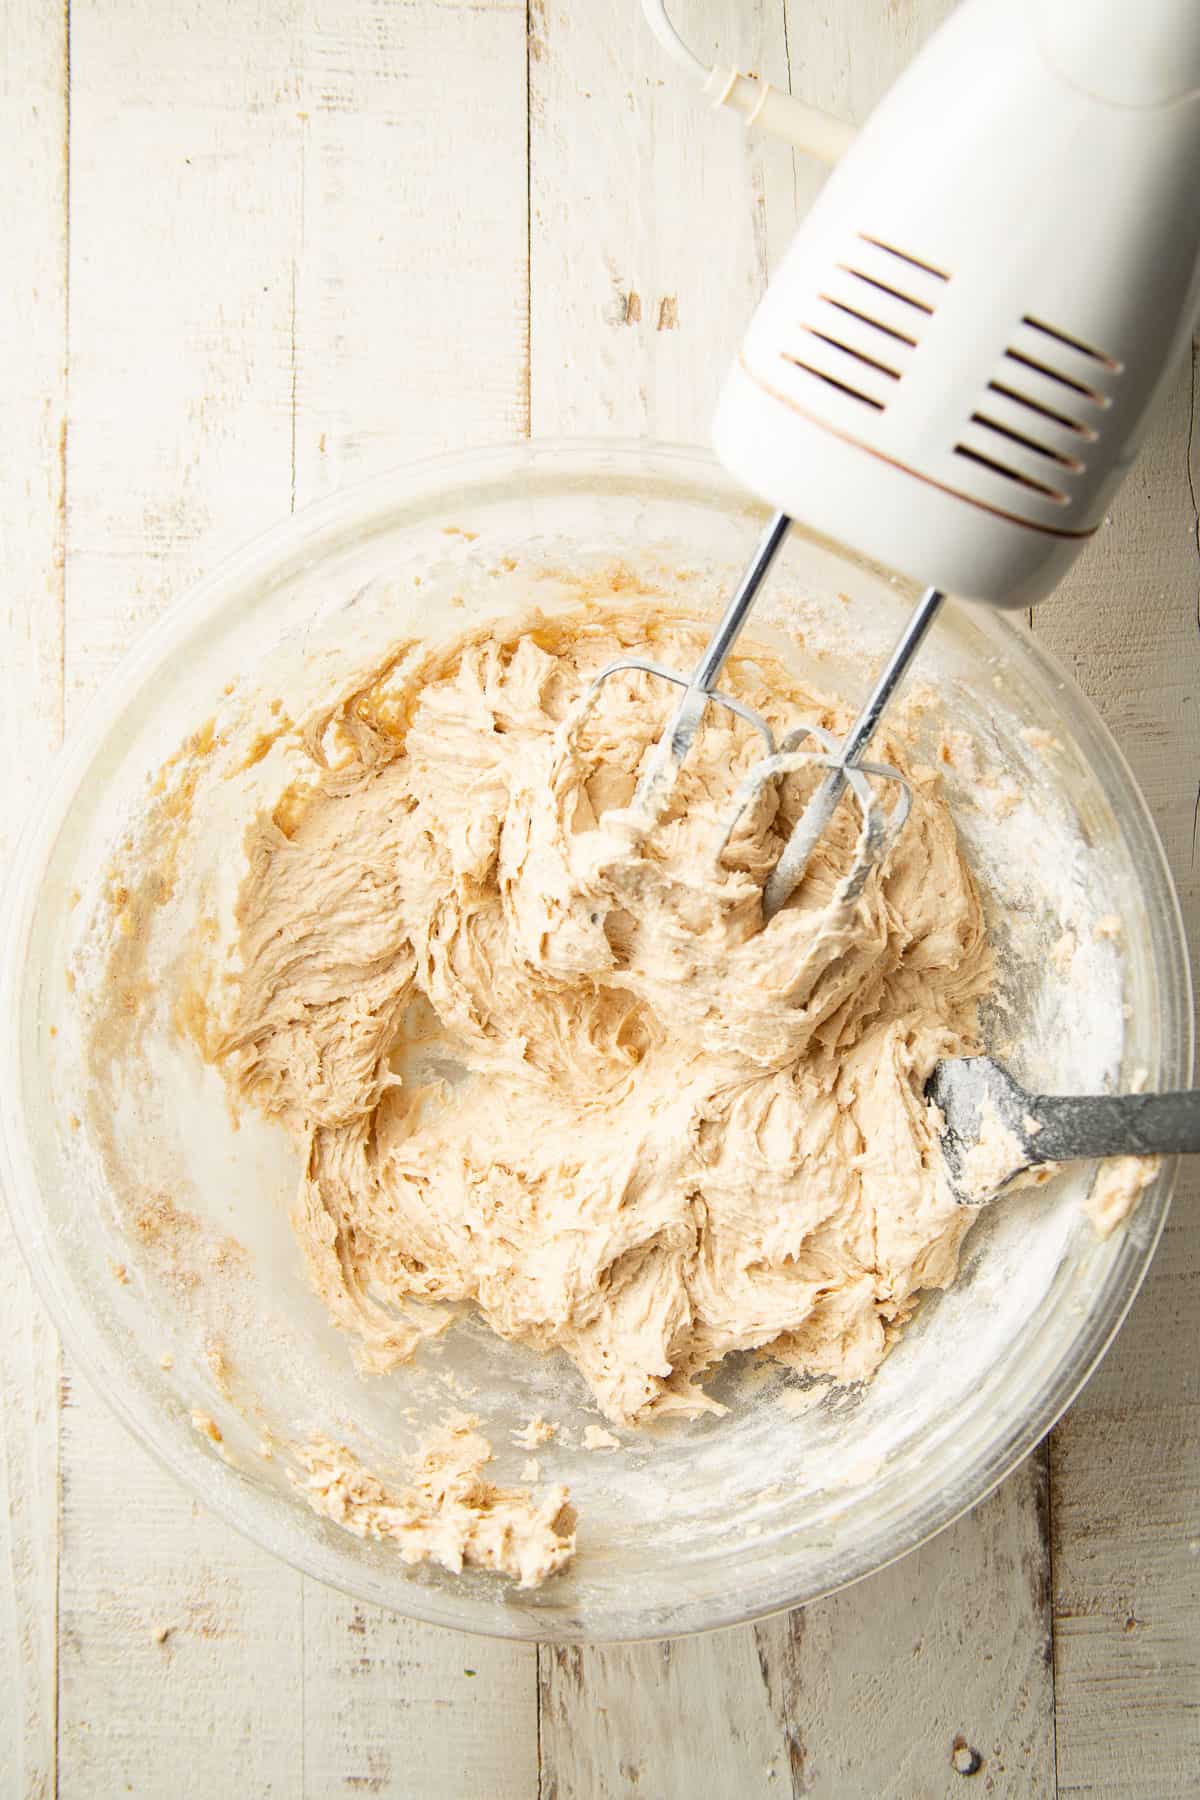 Cookie bar dough in a mixing bowl with an electric mixer and spatula.